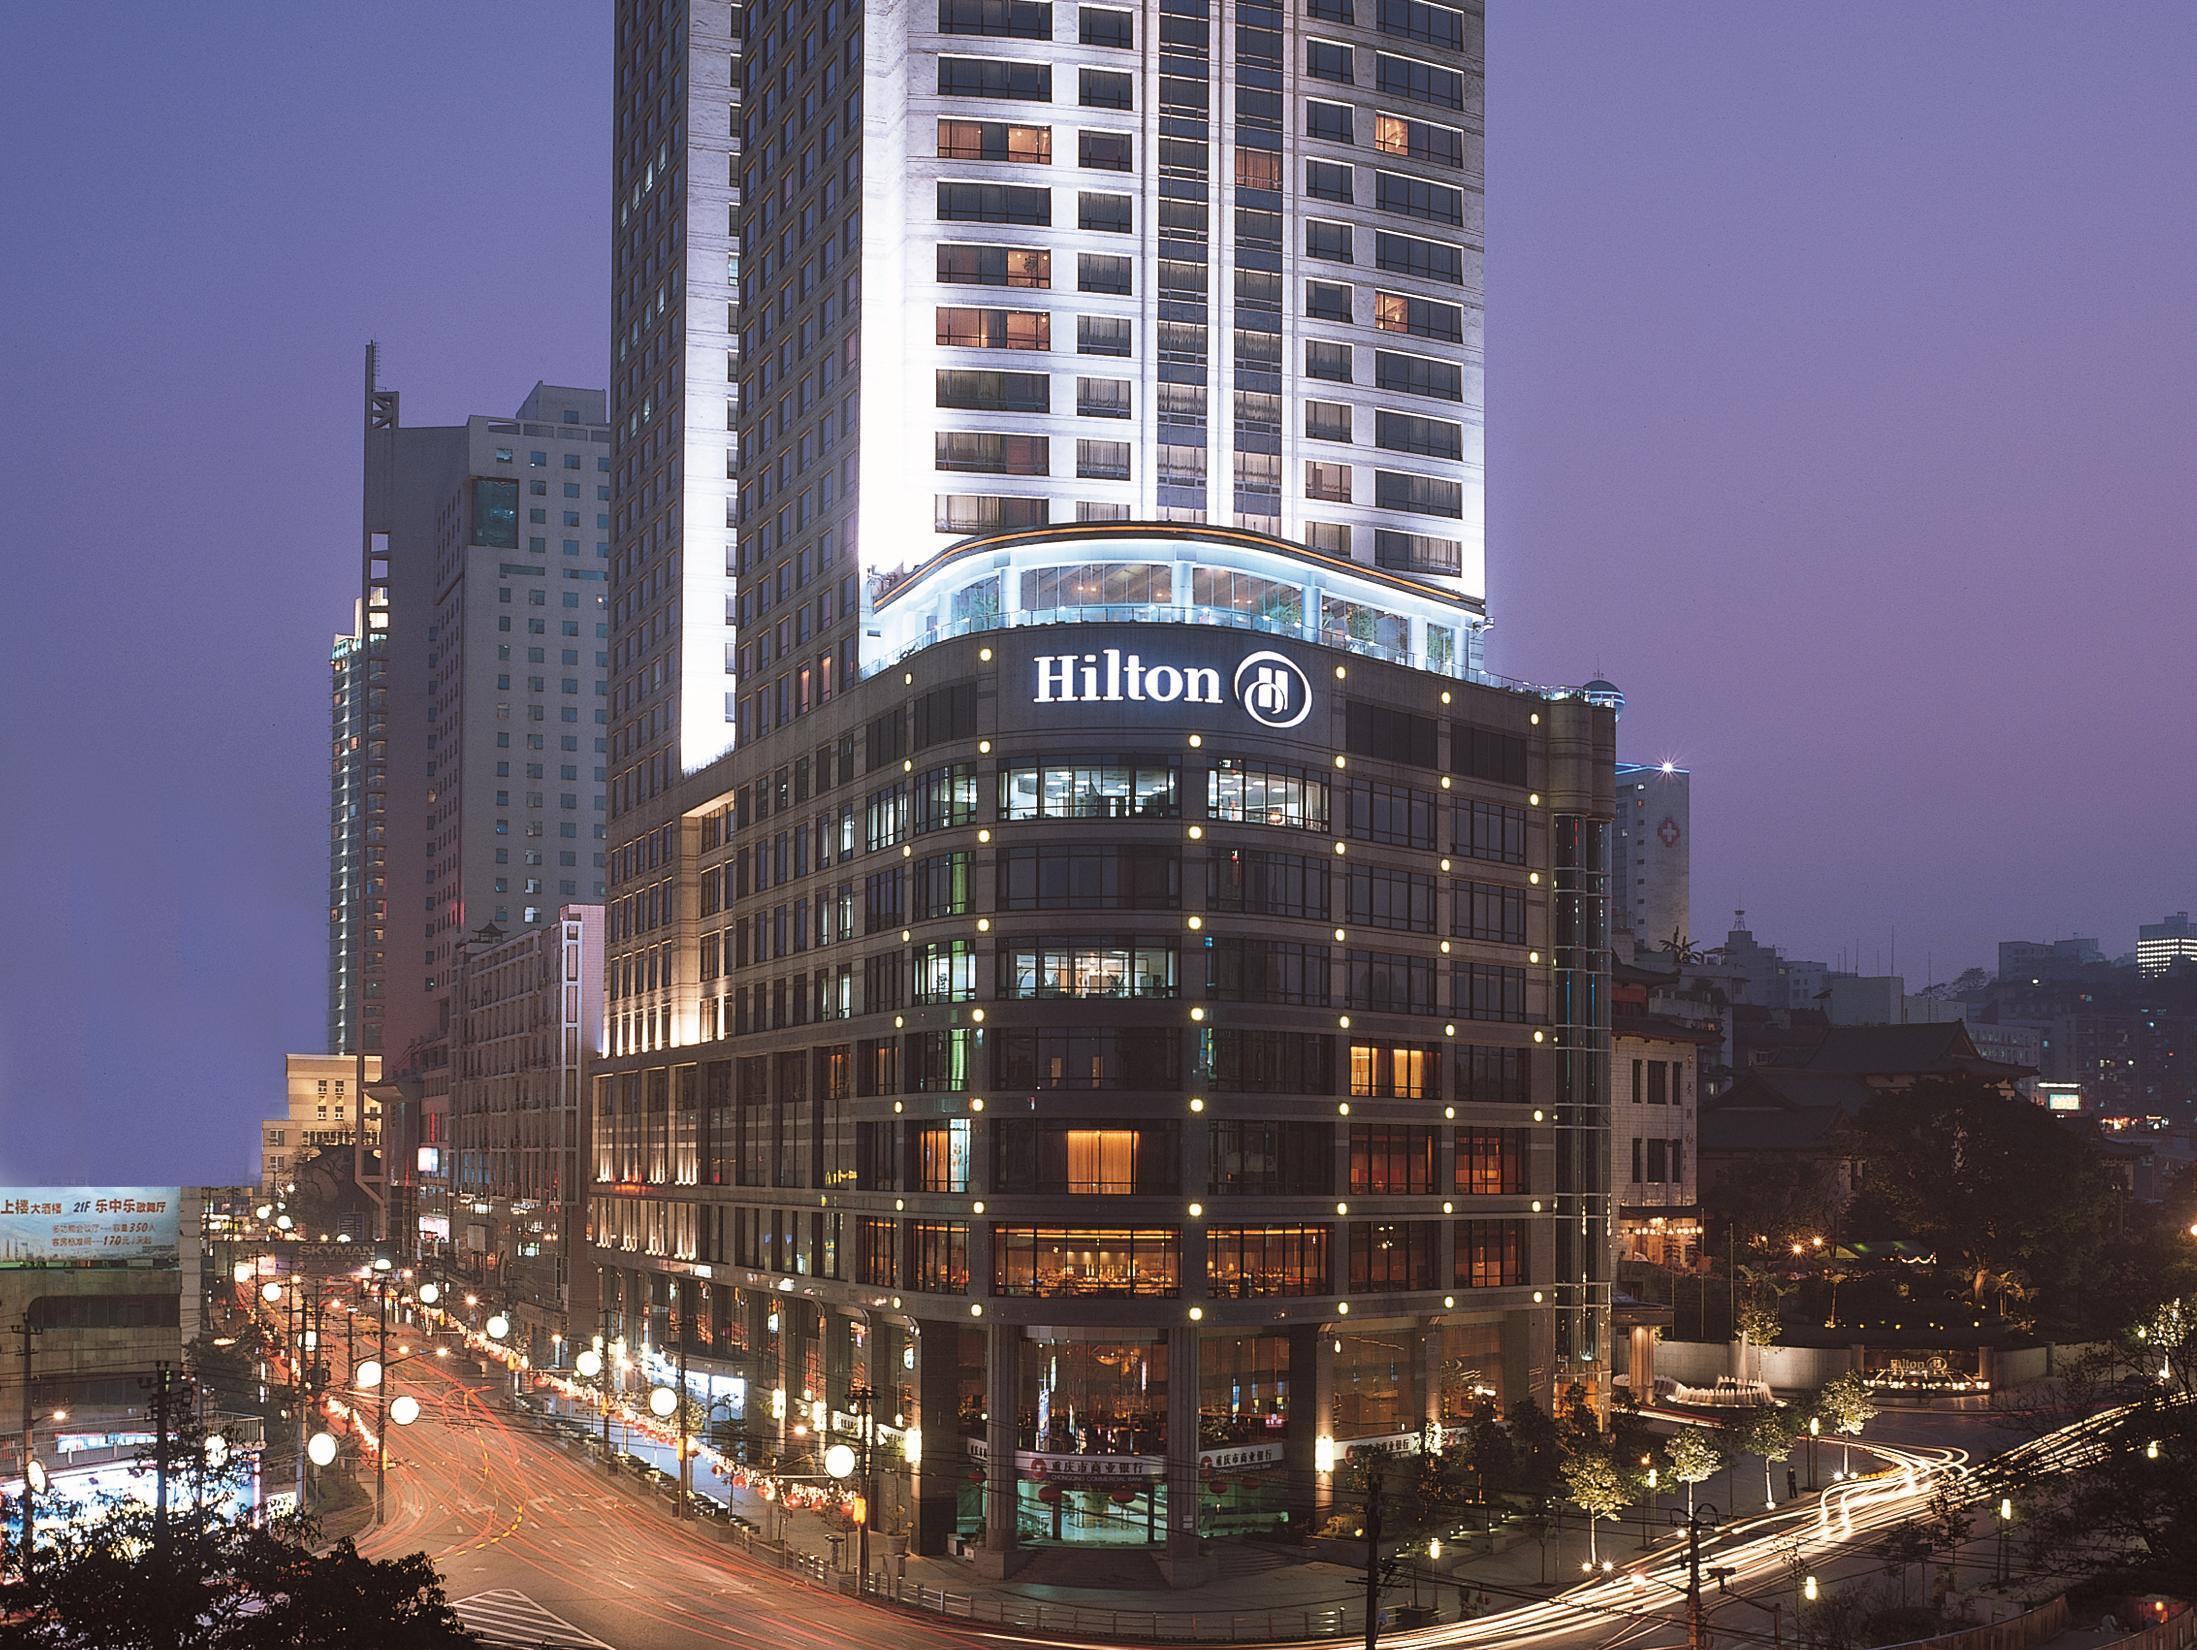 Hilton Chongqing Hotel Booking,Hilton Chongqing Hotel Resort,Hilton Chongqing Hotel reservation,Hilton Chongqing Hotel deals,Hilton Chongqing Hotel Phone Number,Hilton Chongqing Hotel website,Hilton Chongqing Hotel E-mail,Hilton Chongqing Hotel address,Hilton Chongqing Hotel Overview,Rooms & Rates,Hilton Chongqing Hotel Photos,Hilton Chongqing Hotel Location Amenities,Hilton Chongqing Hotel Q&A,Hilton Chongqing Hotel Map,Hilton Chongqing Hotel Gallery,Hilton Chongqing Hotel Chongqing 2016, Chongqing Hilton Chongqing Hotel room types 2016, Chongqing Hilton Chongqing Hotel price 2016, Hilton Chongqing Hotel in Chongqing 2016, Chongqing Hilton Chongqing Hotel address, Hilton Chongqing Hotel Chongqing booking online, Chongqing Hilton Chongqing Hotel travel services, Chongqing Hilton Chongqing Hotel pick up services.